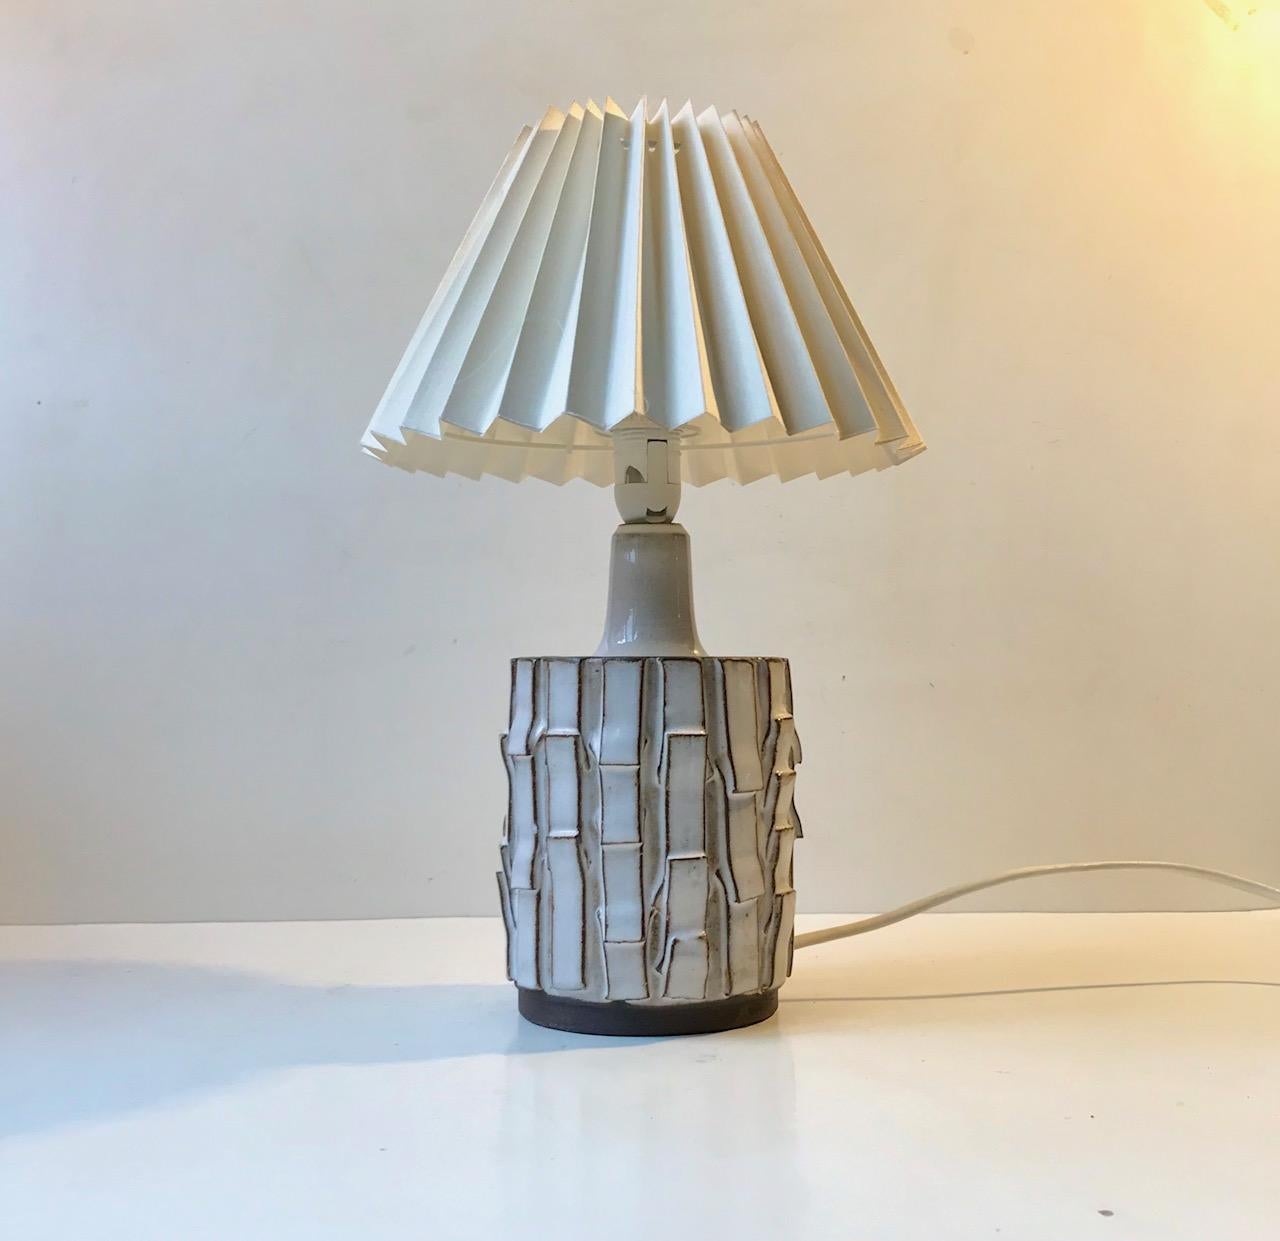 A Japanese inspired ceramic table light in a rather tactile shape. It is executed in a white Salt-glaze and its relief decor resembles overlapping wood. Signed GO for Gottschalk-Olsen and cerated at his workshop Stogo in Denmark during the 1970s.